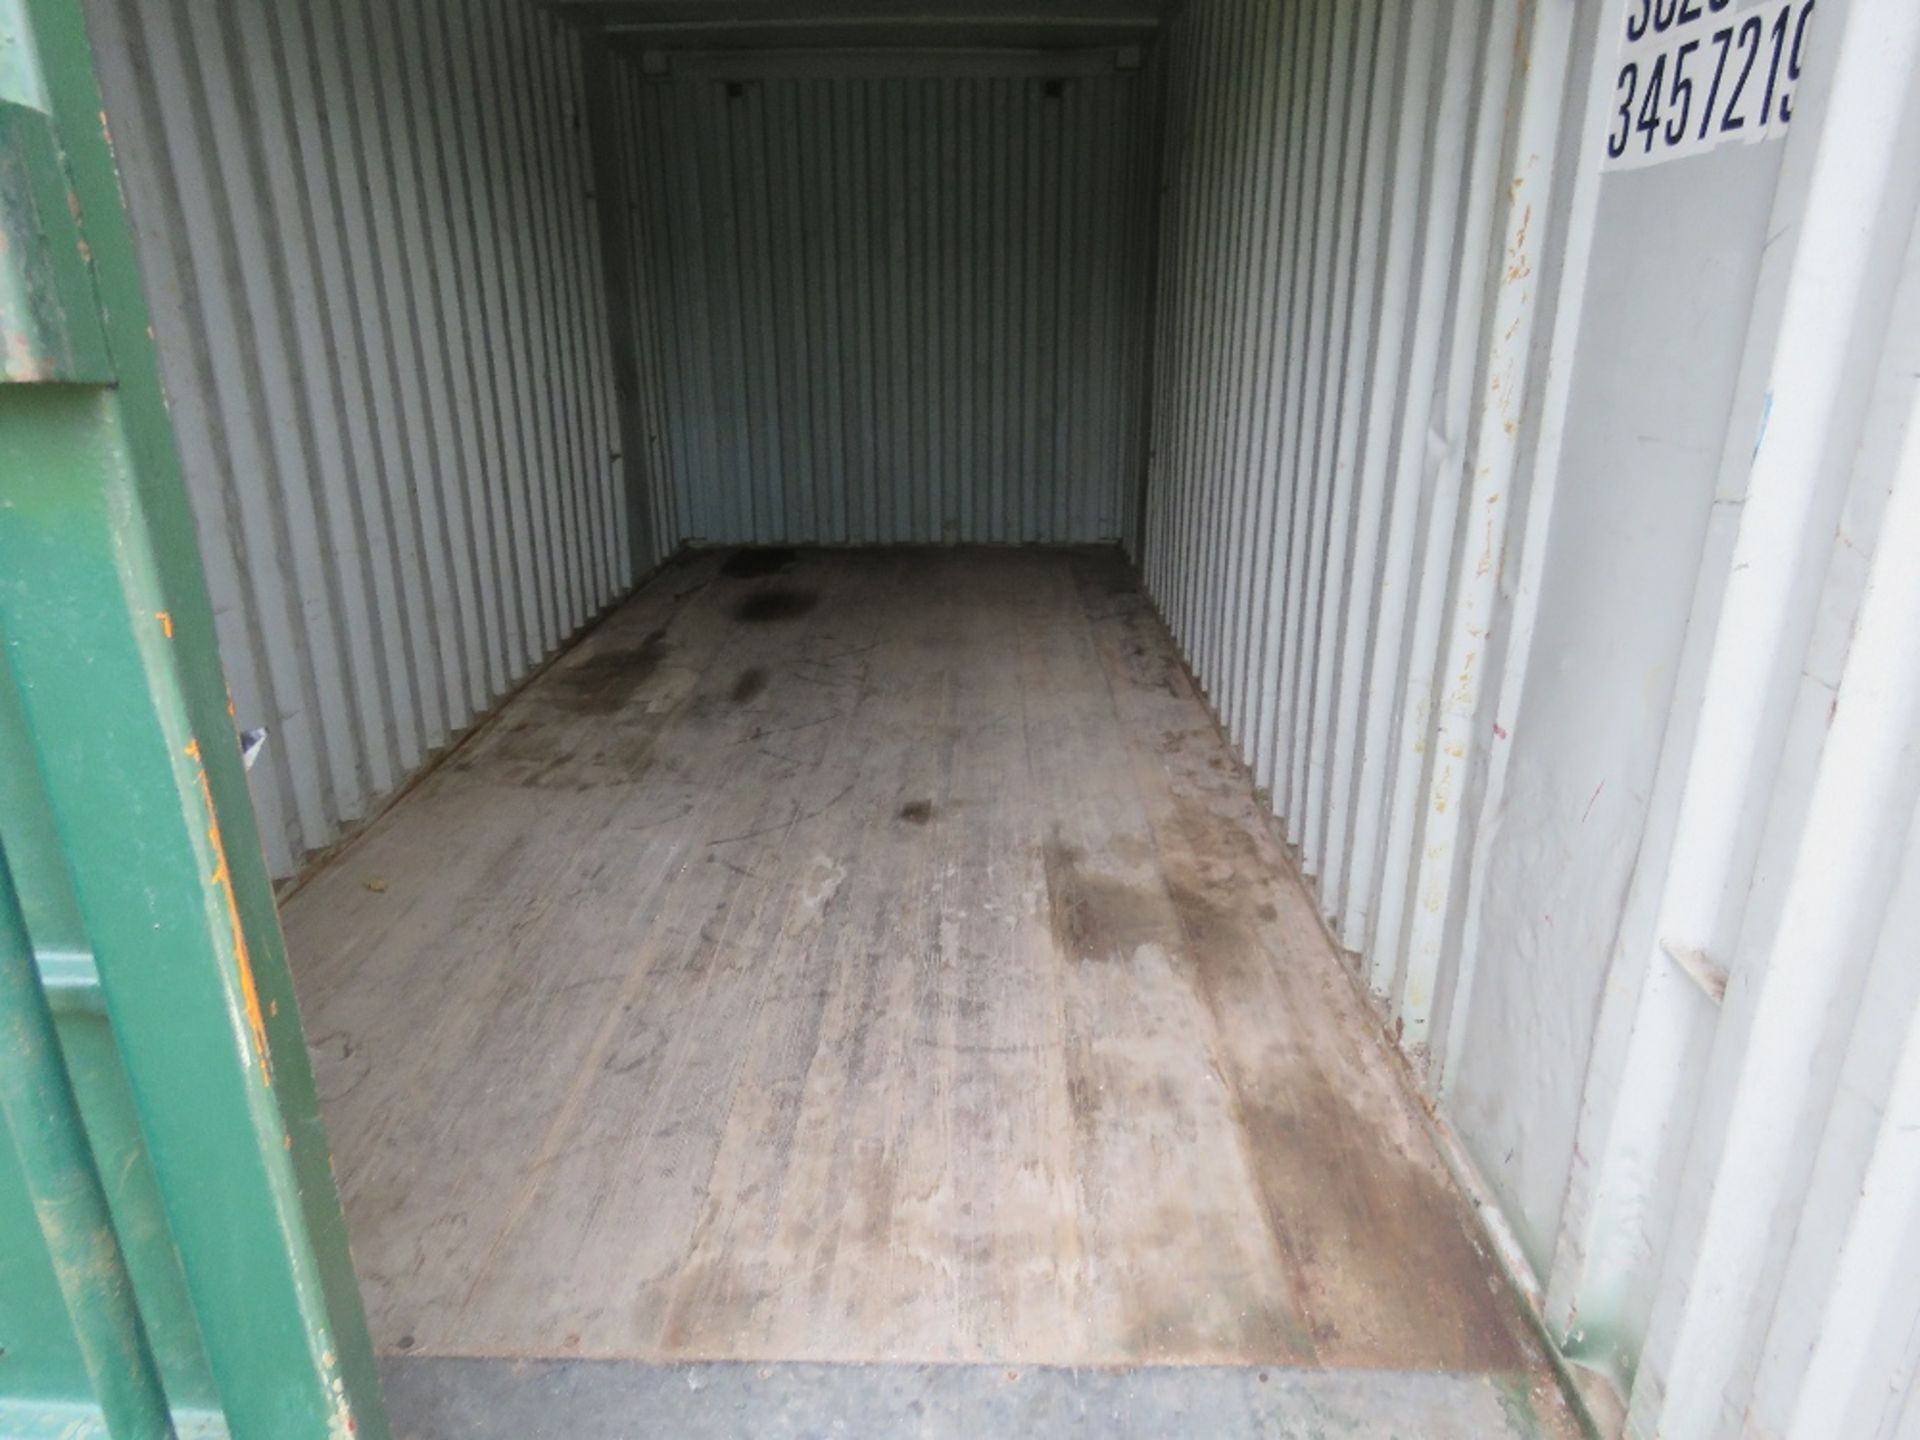 SECURE SHIPPING CONTAINER TYPE SITE STORE, 20FT LENGTH. FROM VISUAL INSPECTION APPEARED DRY INSIDE. - Image 4 of 5